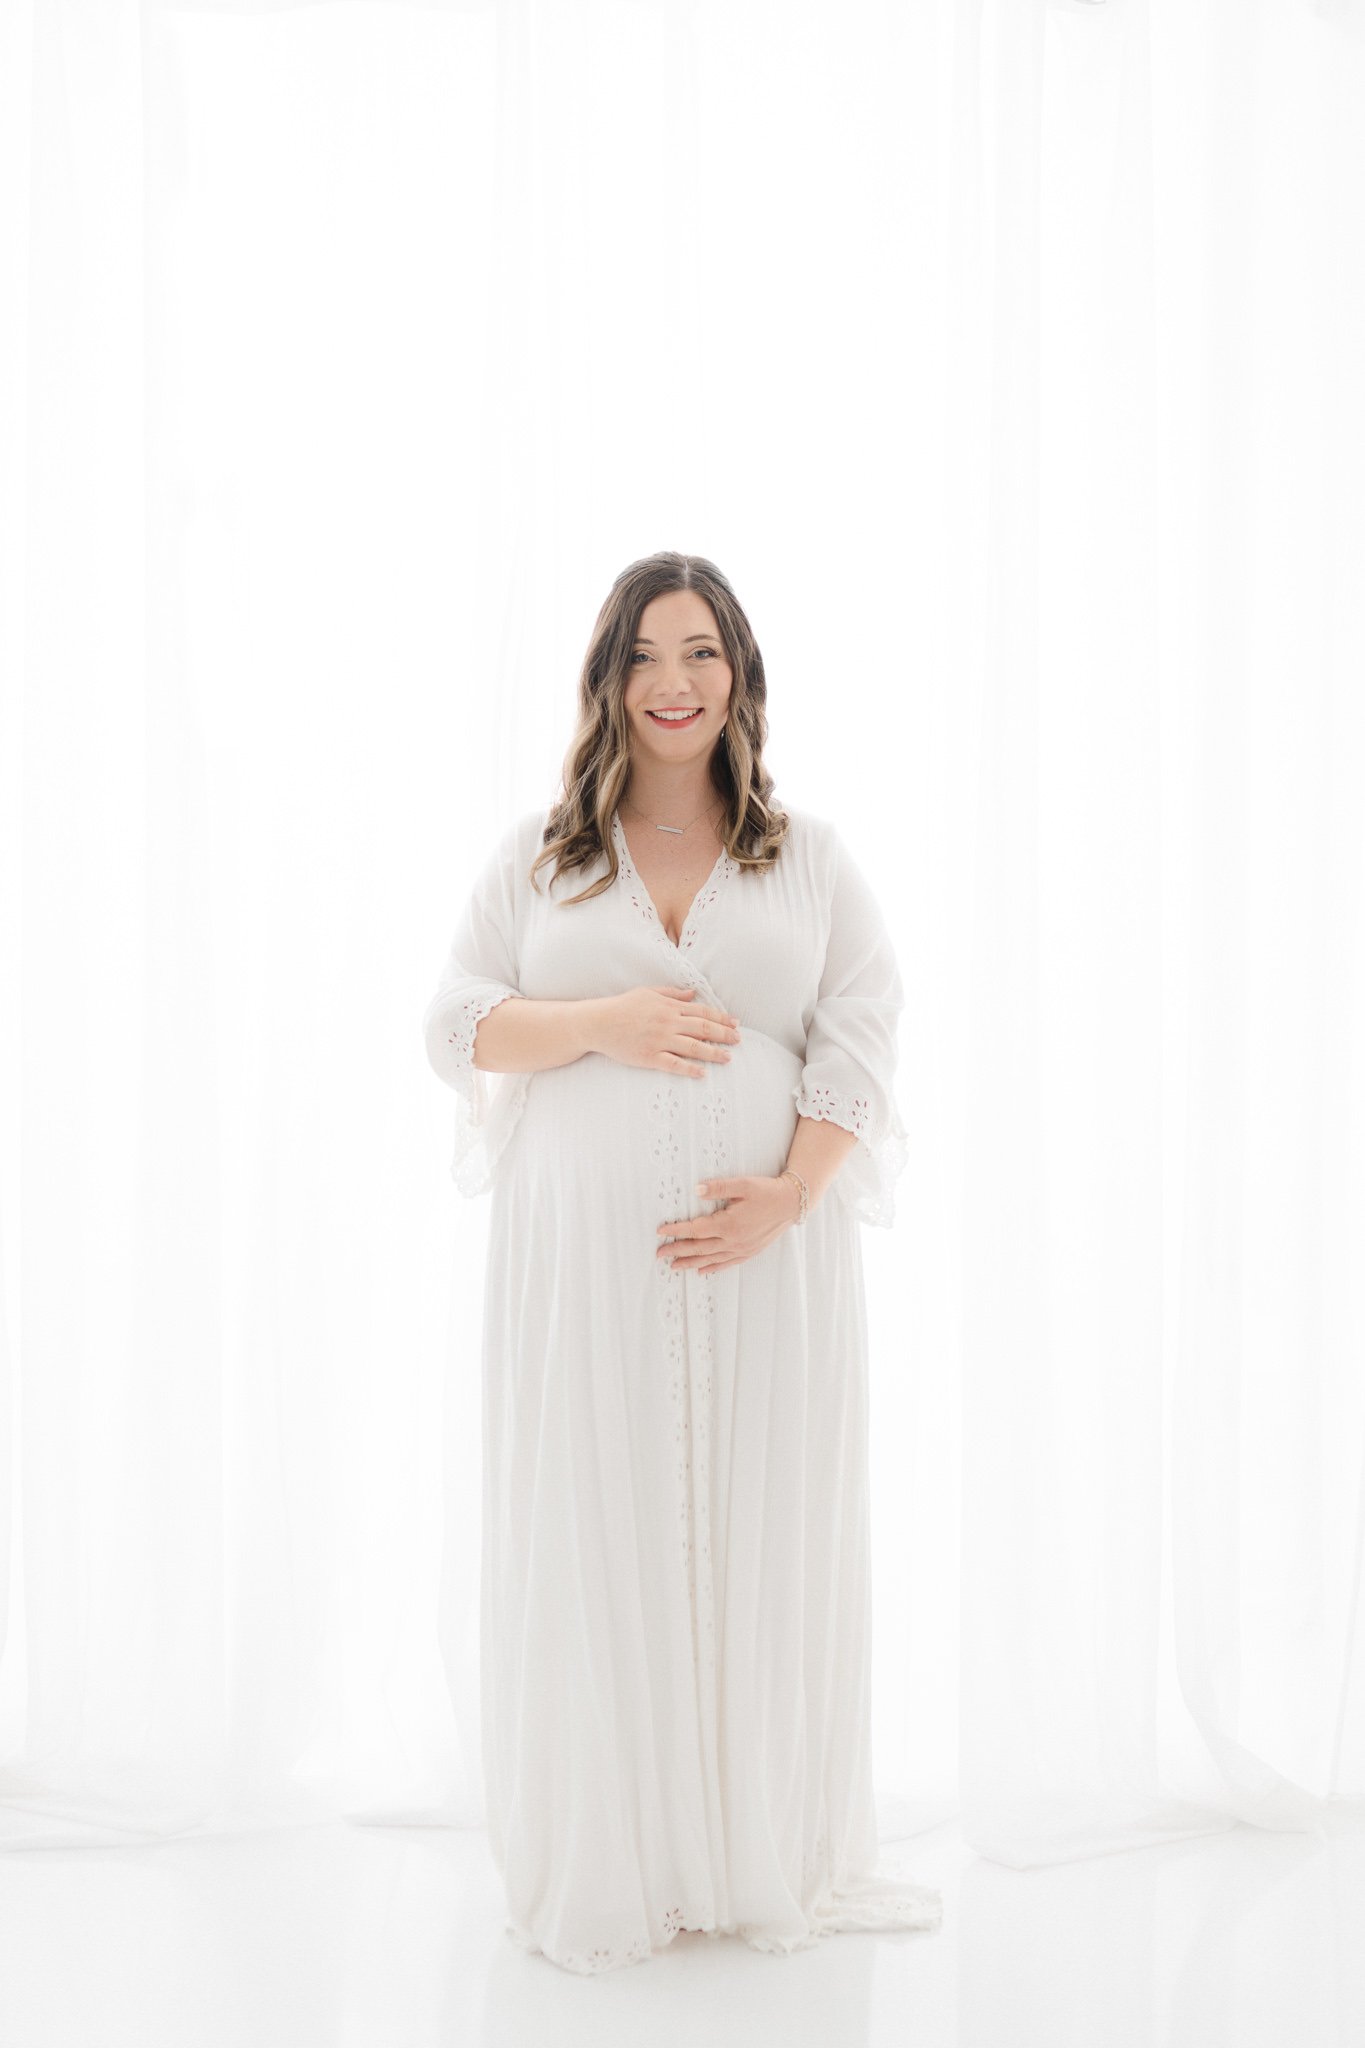  Studio maternity photography was taken in Northern New Jersey by Nicole Hawkins Photography. white studio maternity portraits white maternity dress #NicoleHawkinsPhotography #NicoleHawkinsMaternity #Babyontheway #studiomaternityNJ #whitestudiomatern